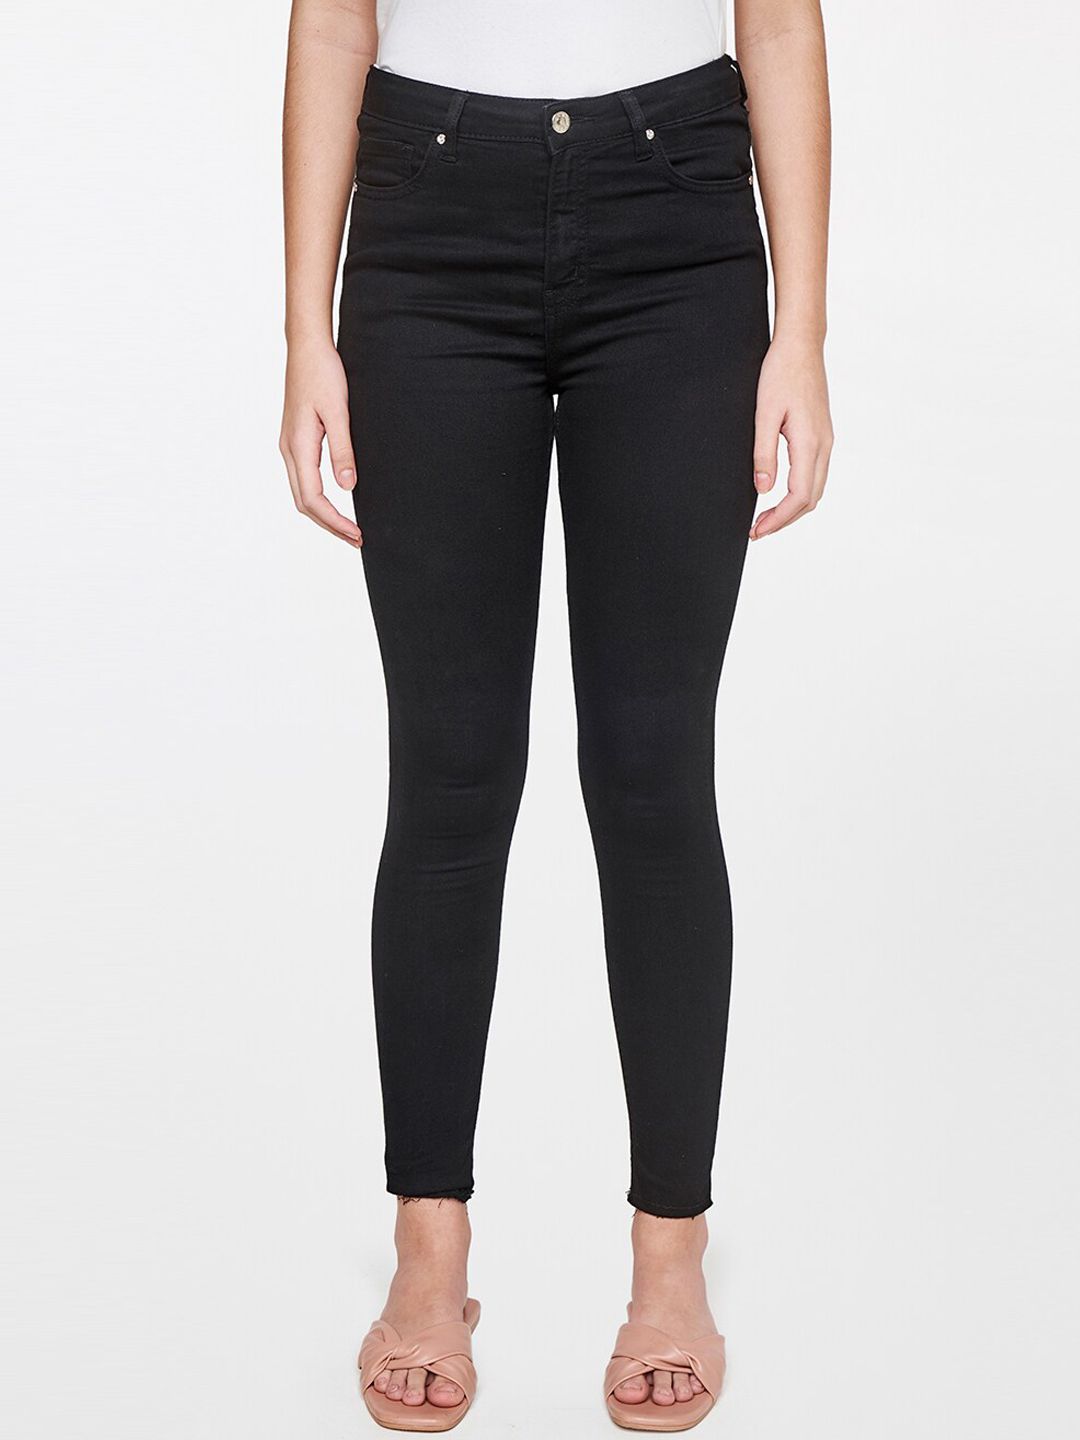 AND Women Black Solid Slim Fit Stretchable Jeans Price in India